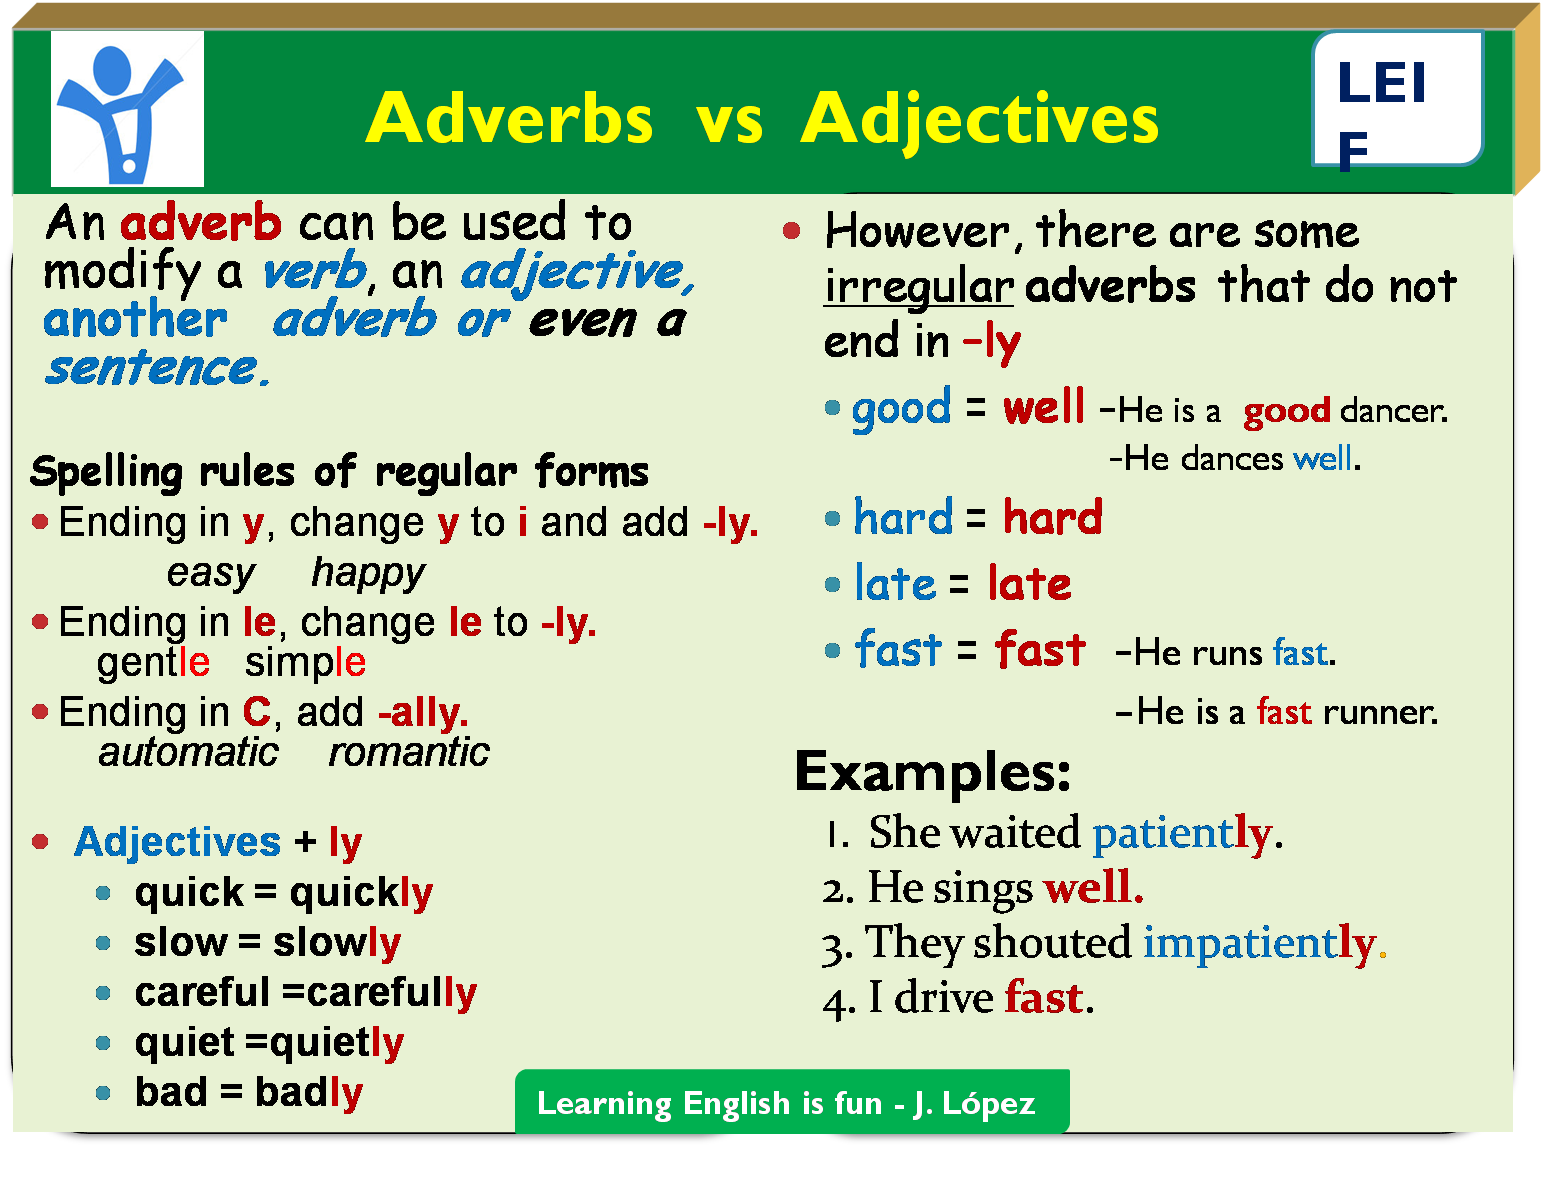 Adverbs careful. Adverbs and adjectives правила. Adjectives and adverbs правило. Adverbs from adjectives правило. Adverbs правило.